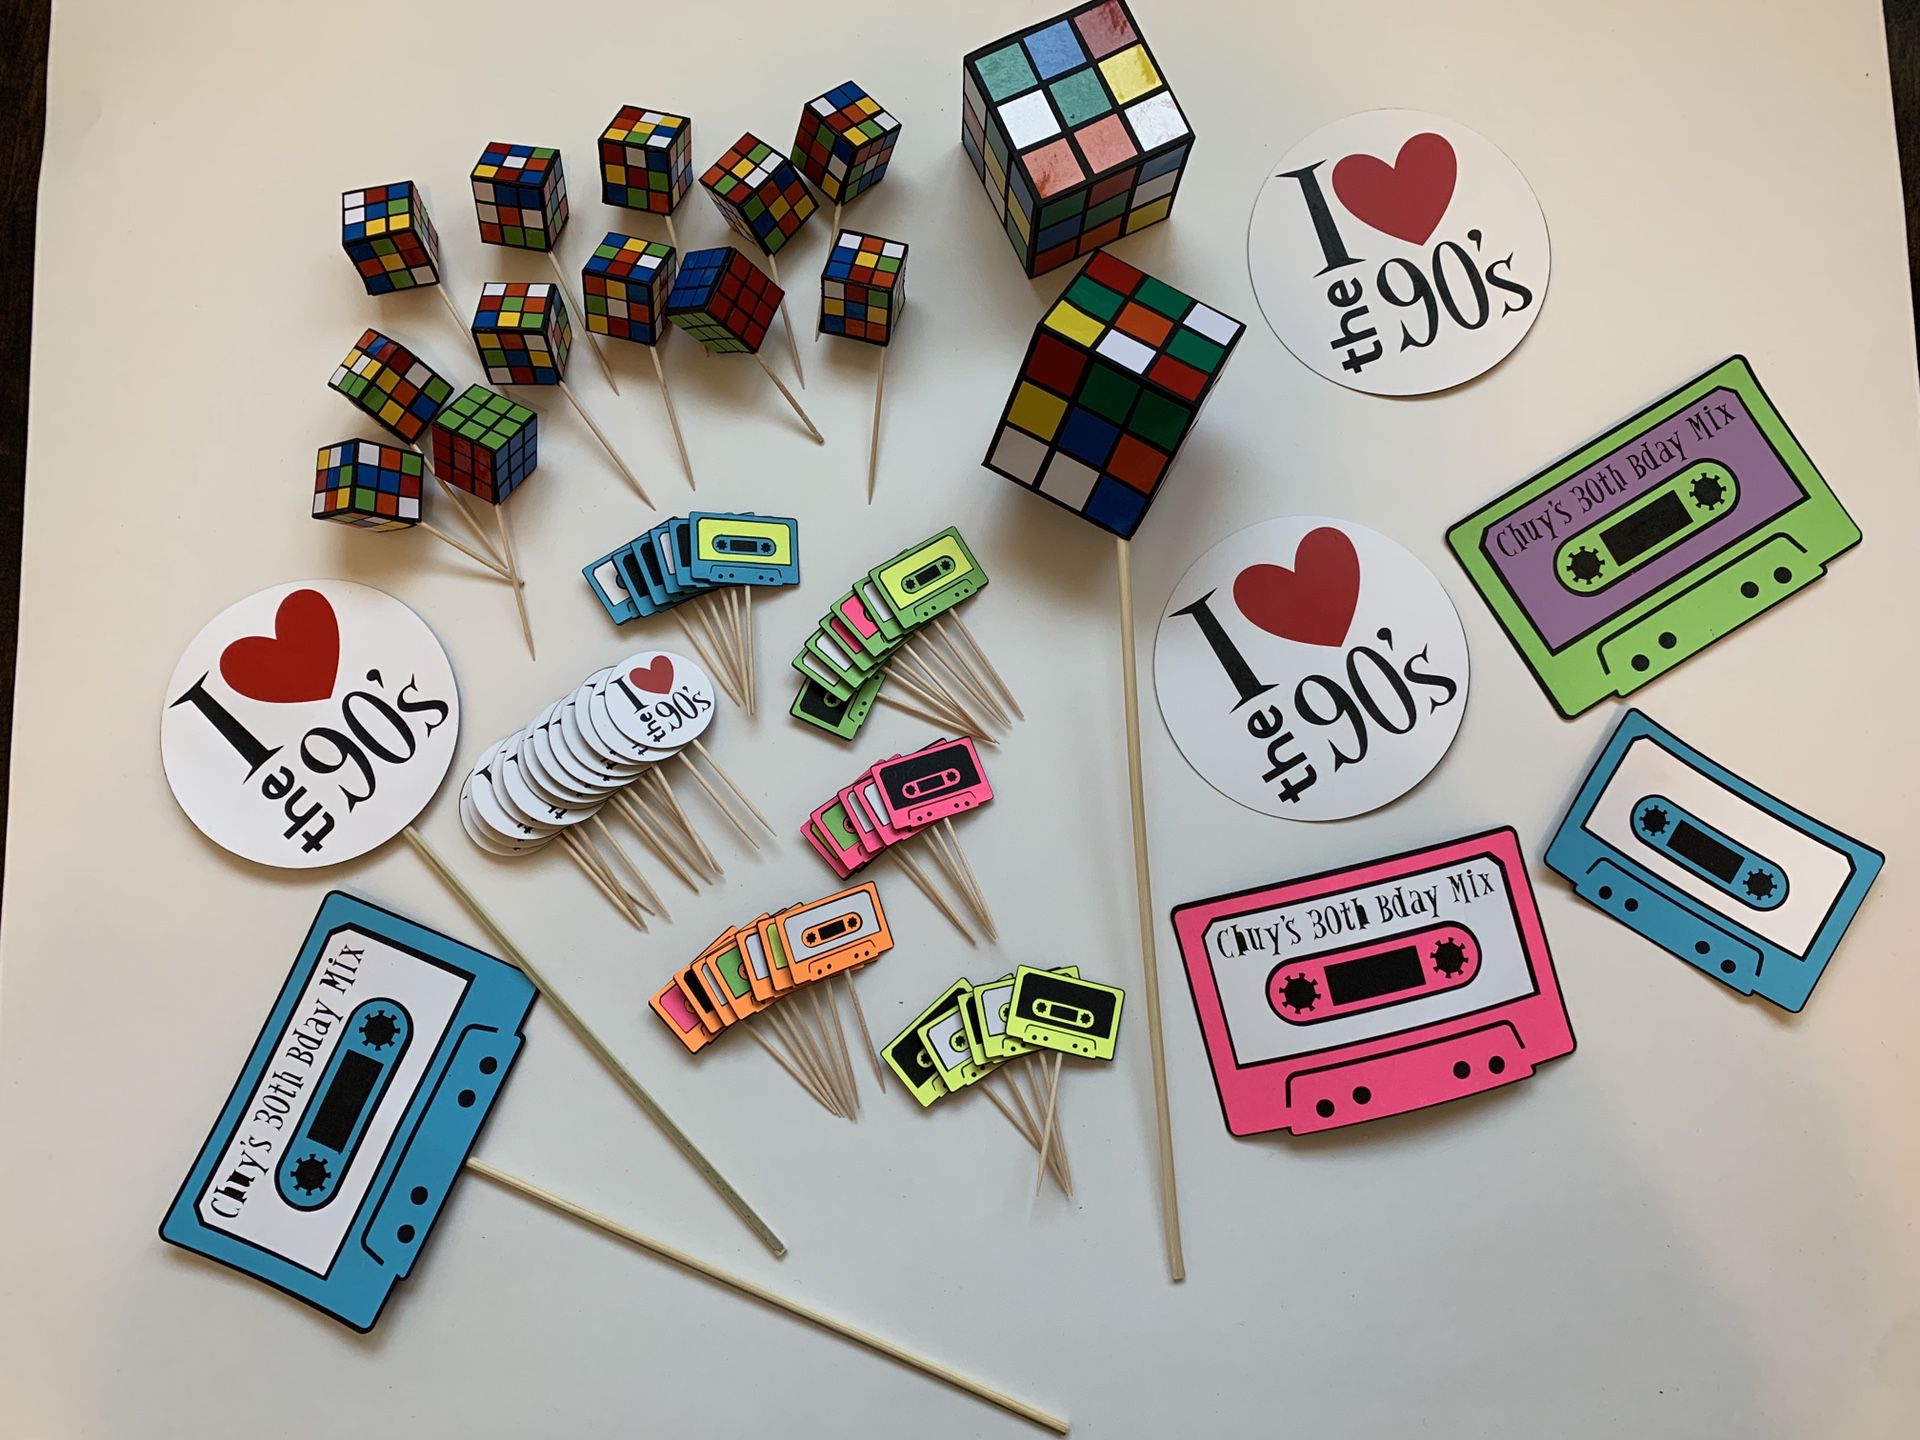 80’s/ 90’s Bday party cupcake toppers and decor